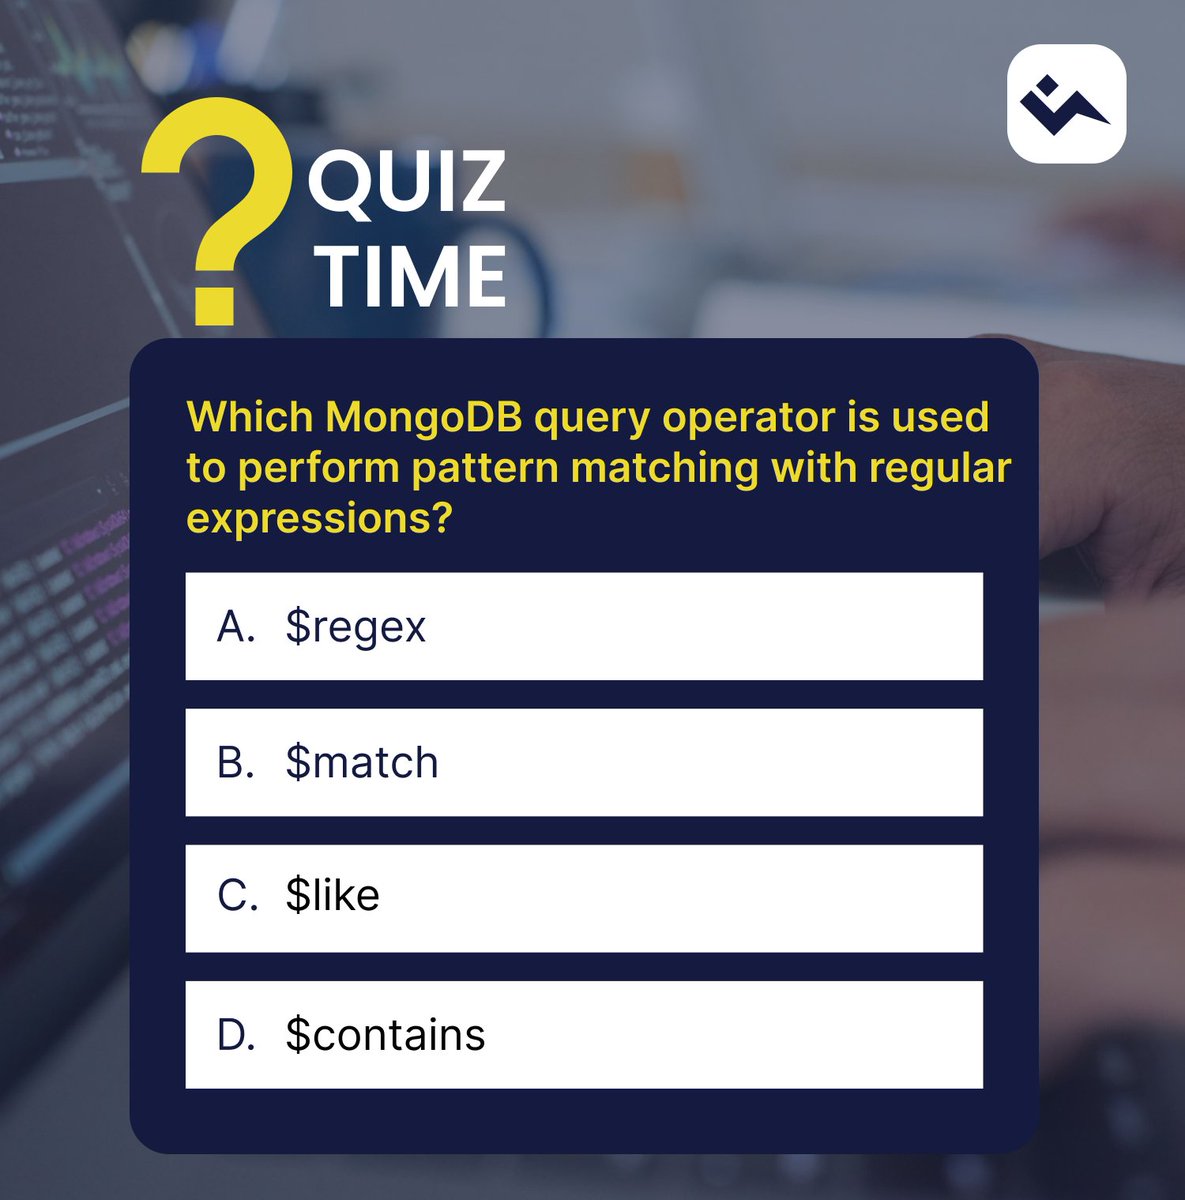 Time for some MongoDB knowledge! 🧠 Which query operator enables pattern matching with regular expressions?
A) $regex
B) $match
C) $like
D) $contains

#mongodbquiz #patternmatching #databasetrivia #codingchallenge #techknowledge #programmingtrivia #mongodb #regex